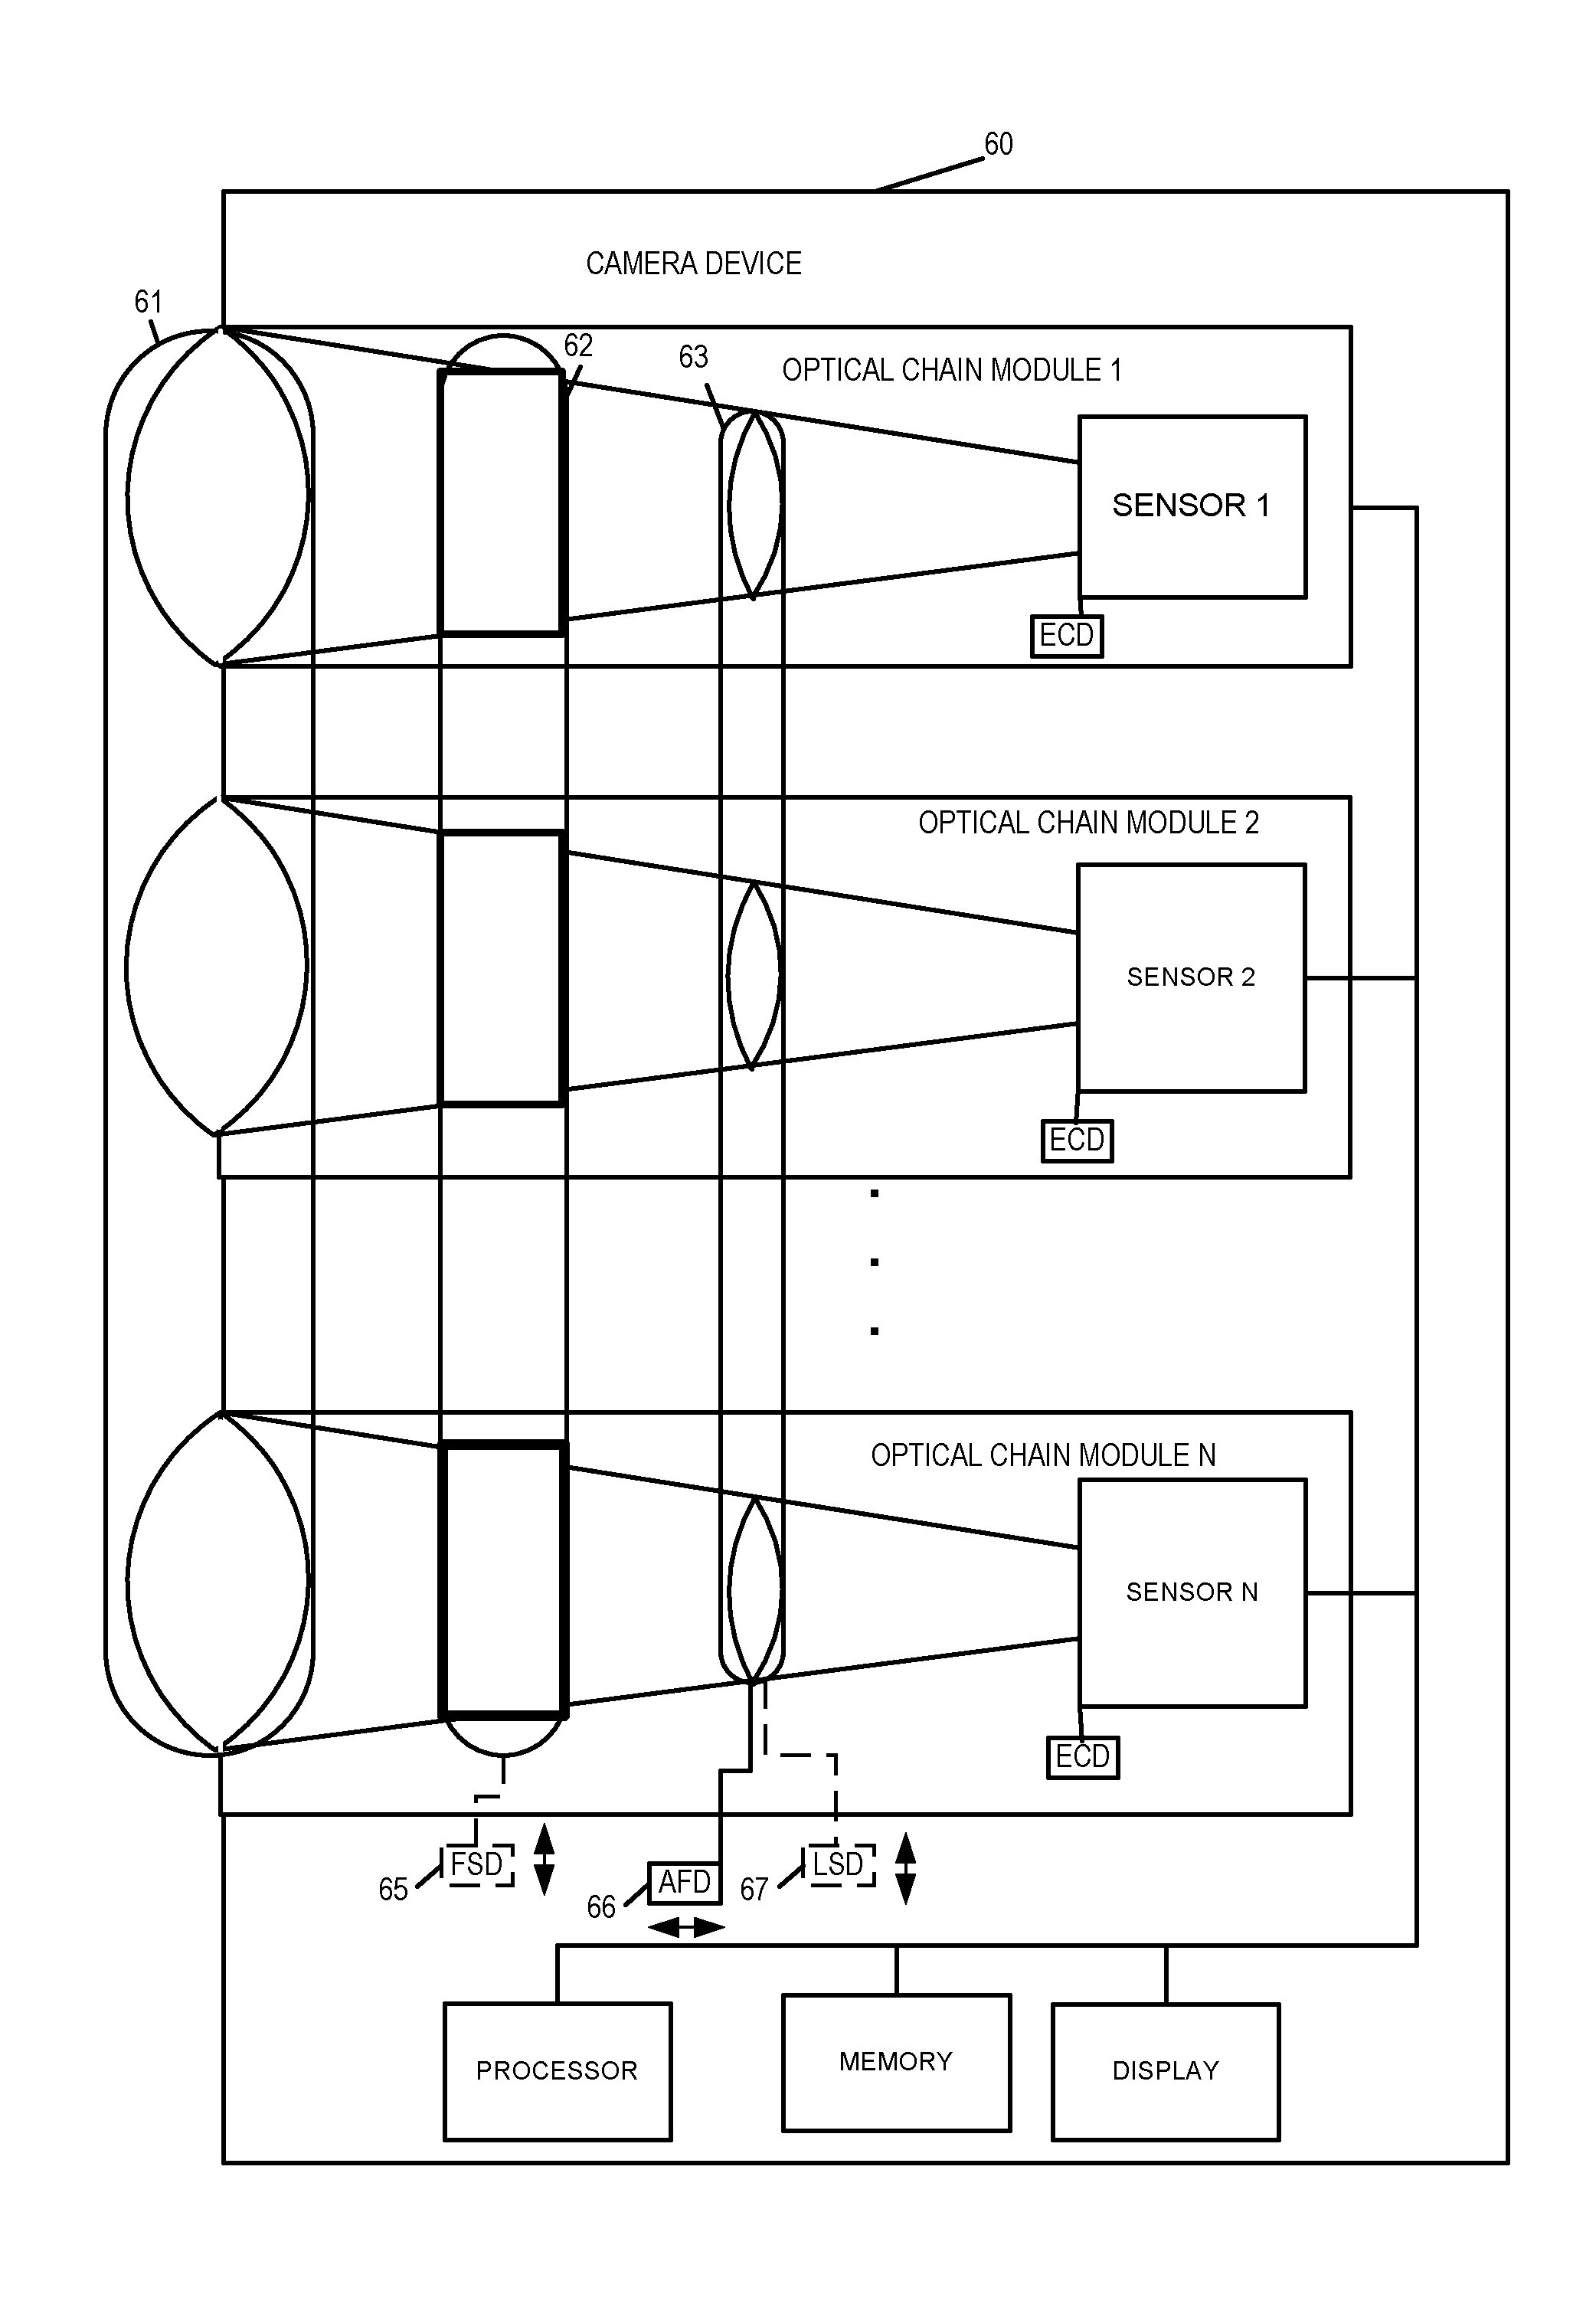 Methods and apparatus relating to a camera including multiple optical chains